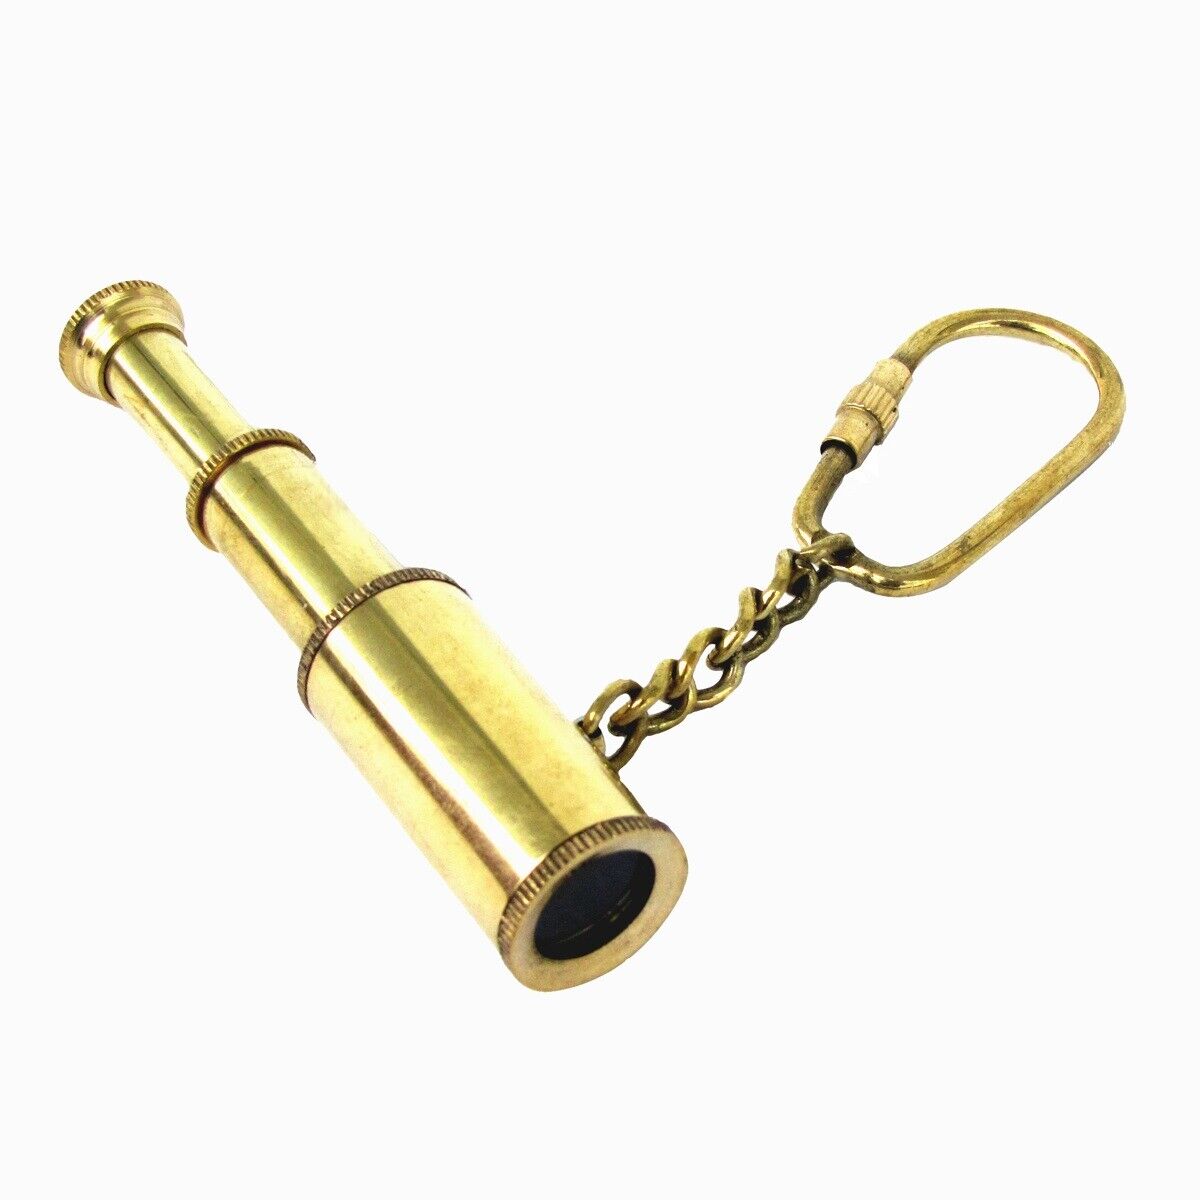 Solid Brass Miniature Functional Collapsible Telescope Keychain Spyglass Scope